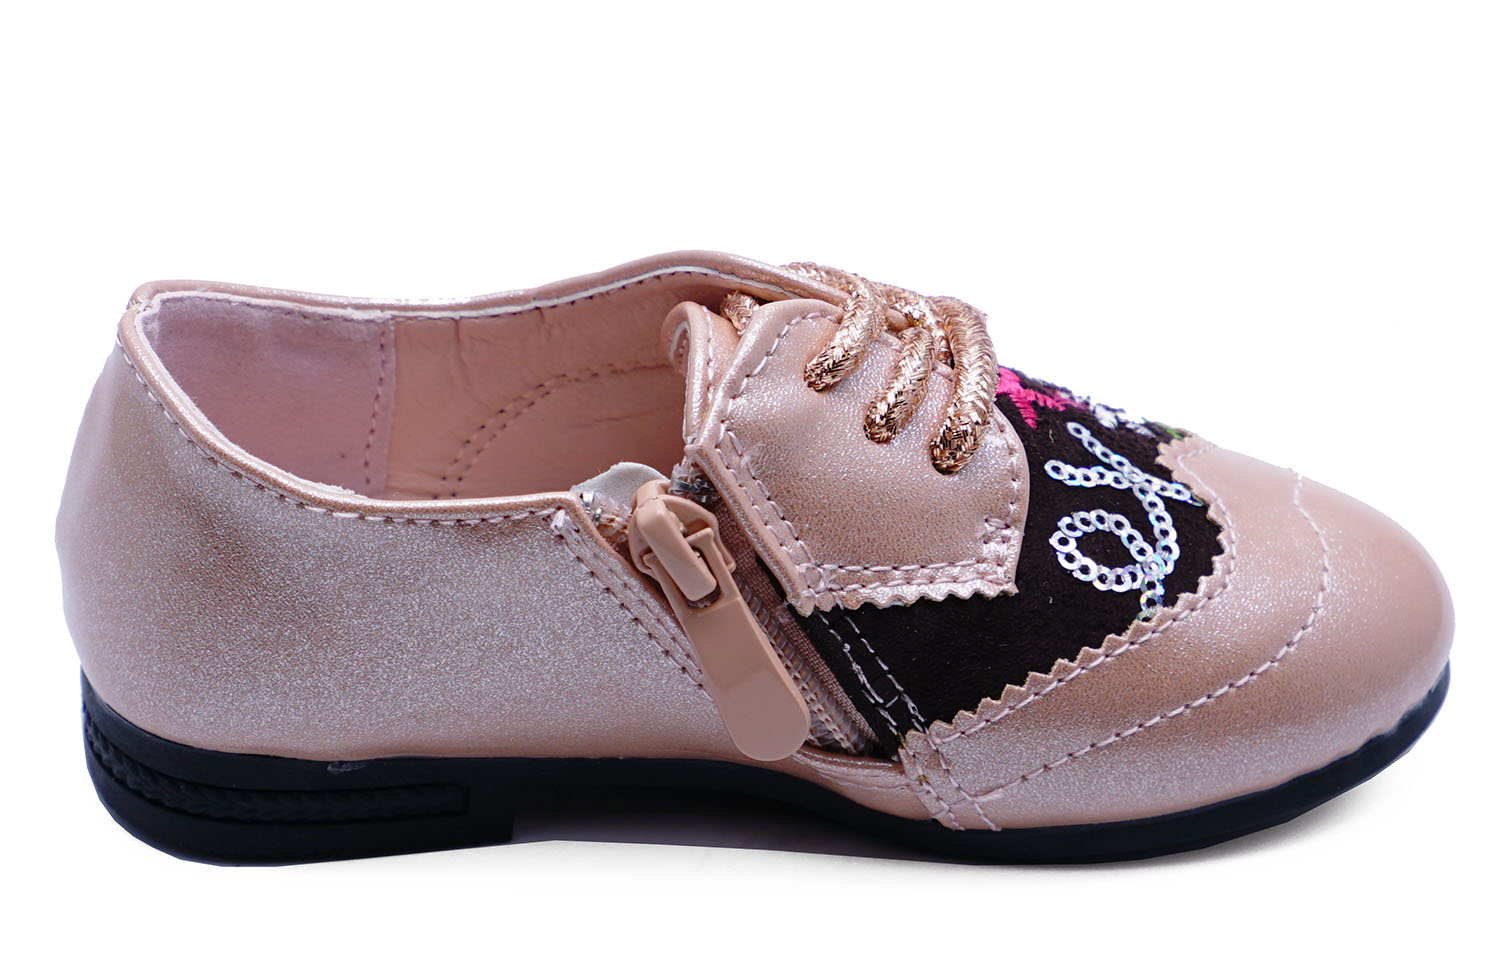 GIRLS CUTE PINK GLITTER LACE-UP BROGUES FLAT PARTY CHILDRENS SHOES PUMPS UK 8-2